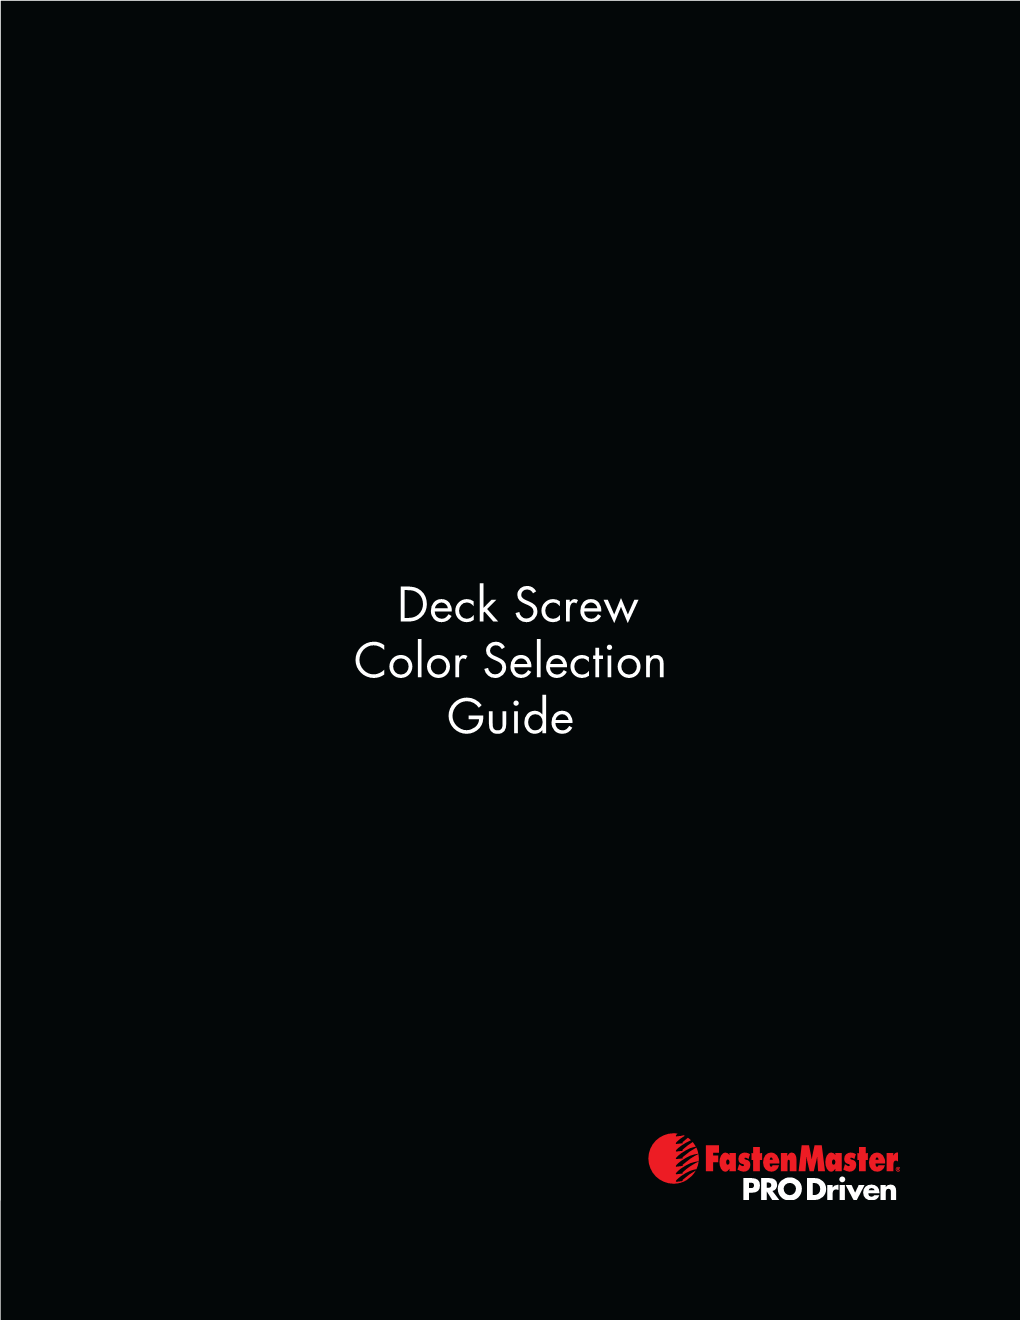 Deck Screw Color Selection Guide